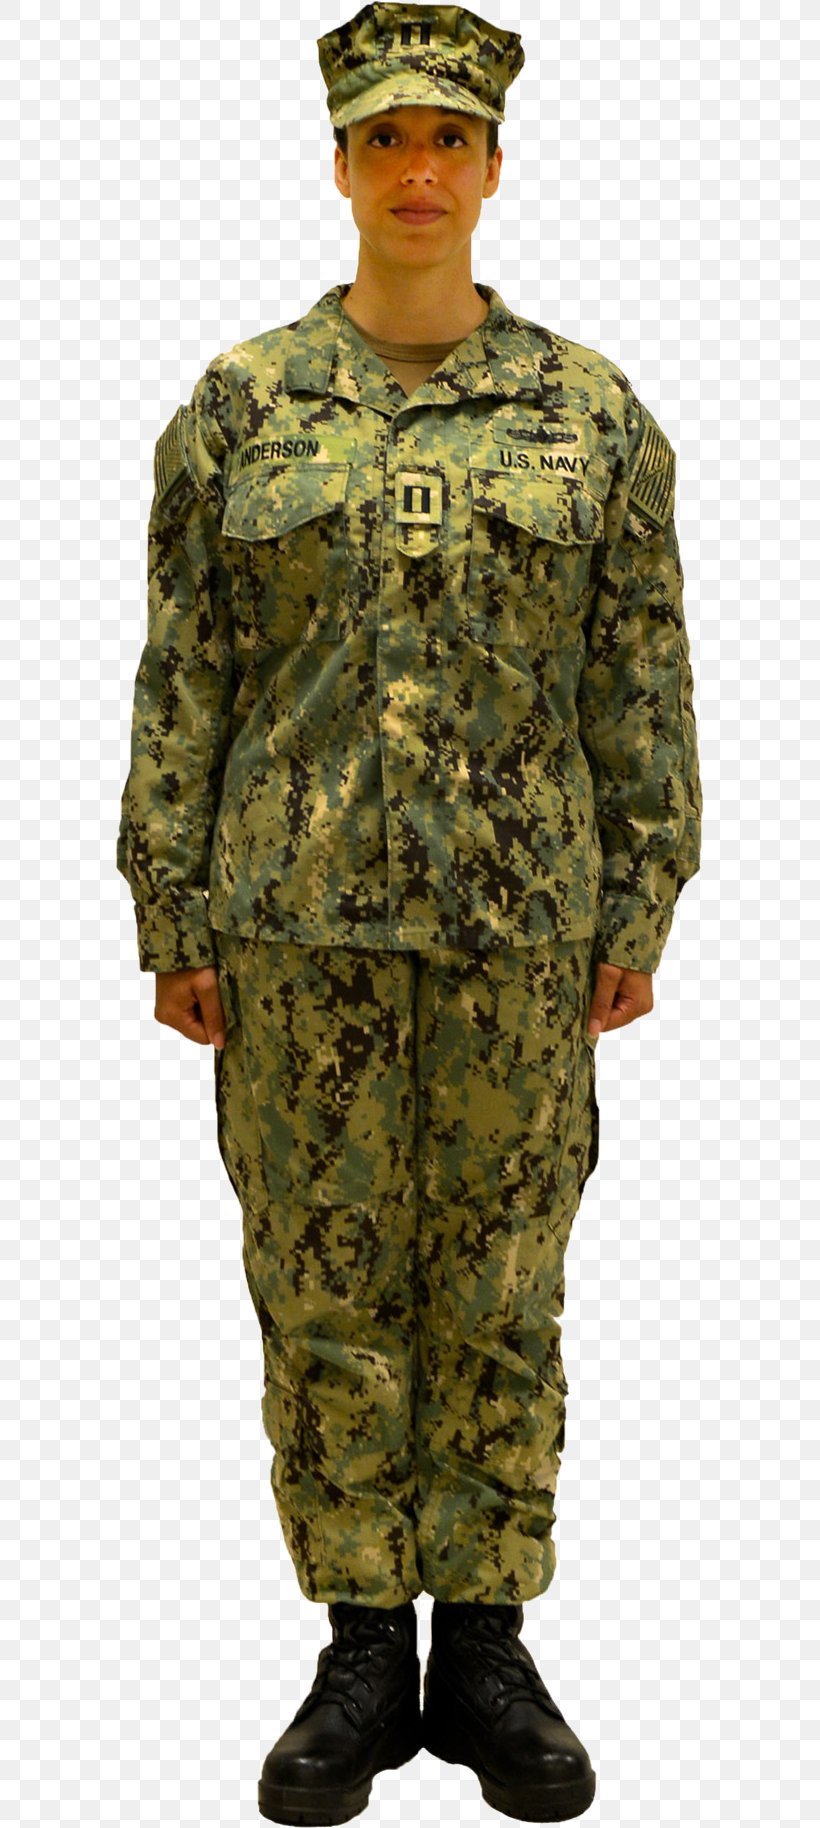 Uniforms Of The United States Navy Military Camouflage Army Combat Uniform Uniforms Of The United States Armed Forces, PNG, 588x1828px, United States Navy, Army, Army Combat Uniform, Battle Dress Uniform, Camouflage Download Free